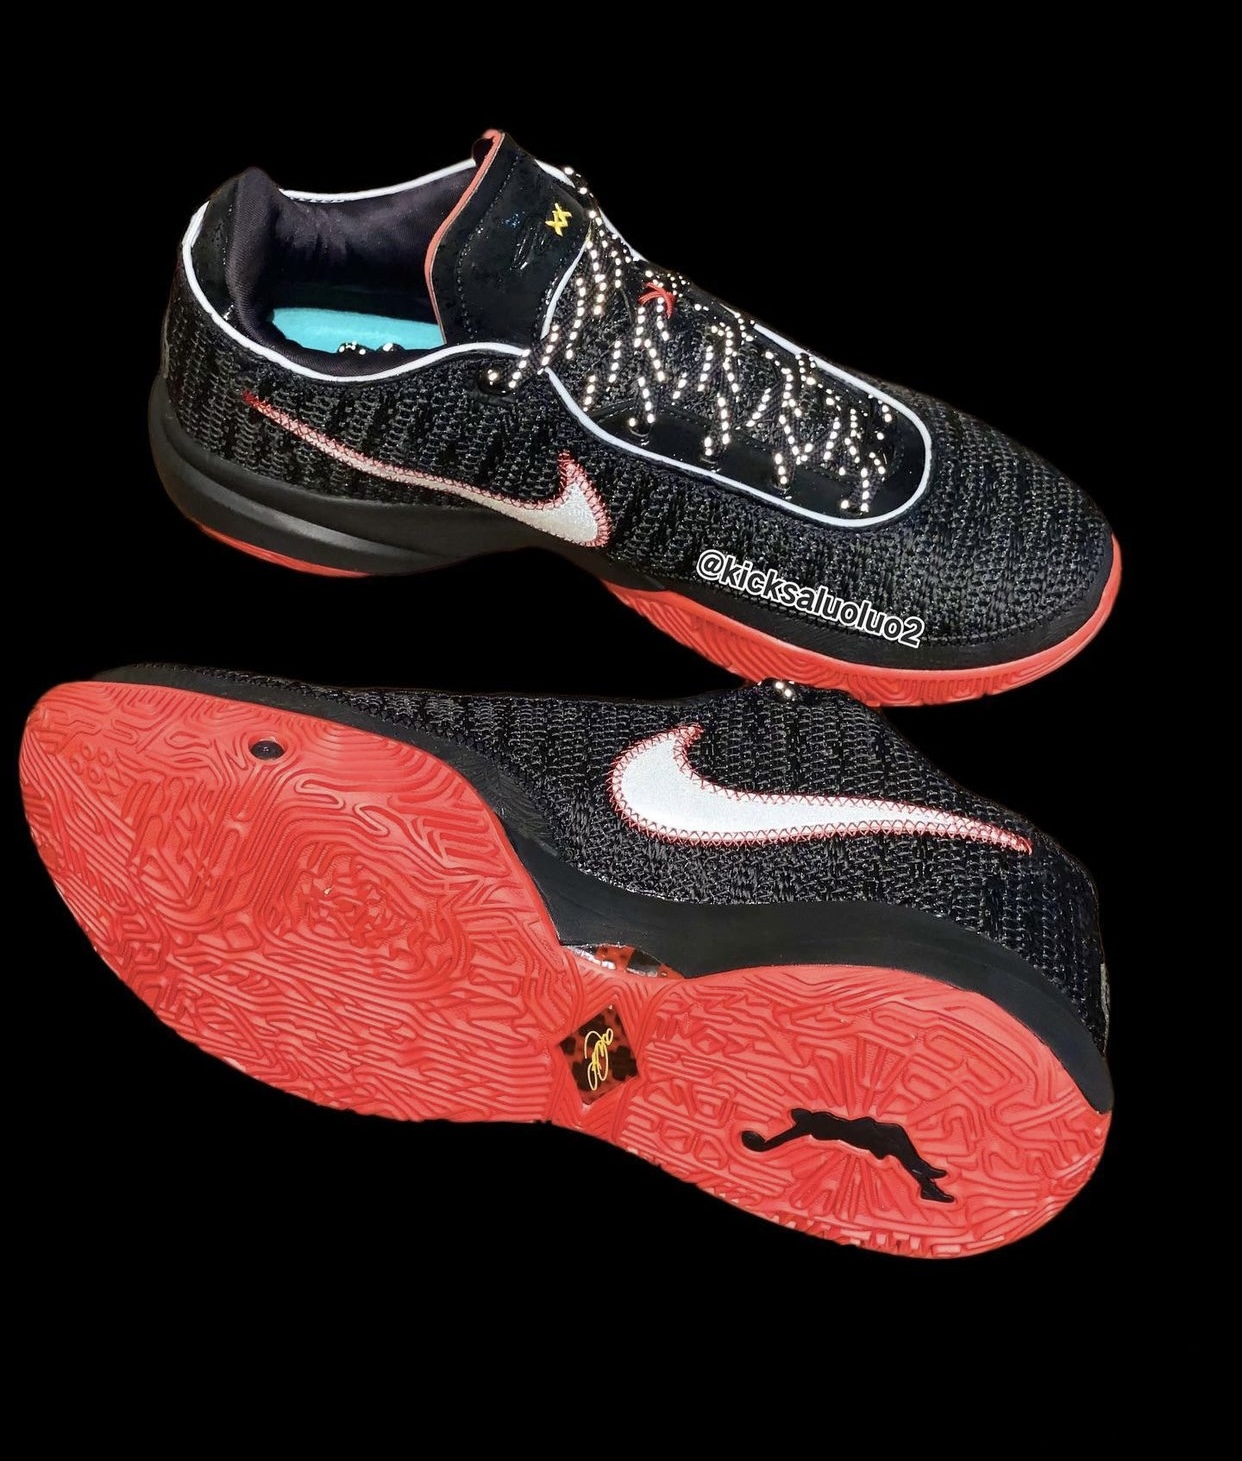 Kids-Exclusive Nike LeBron 18 Low Covered in Florals Black University Red Gold DJ5423-001 Release Date